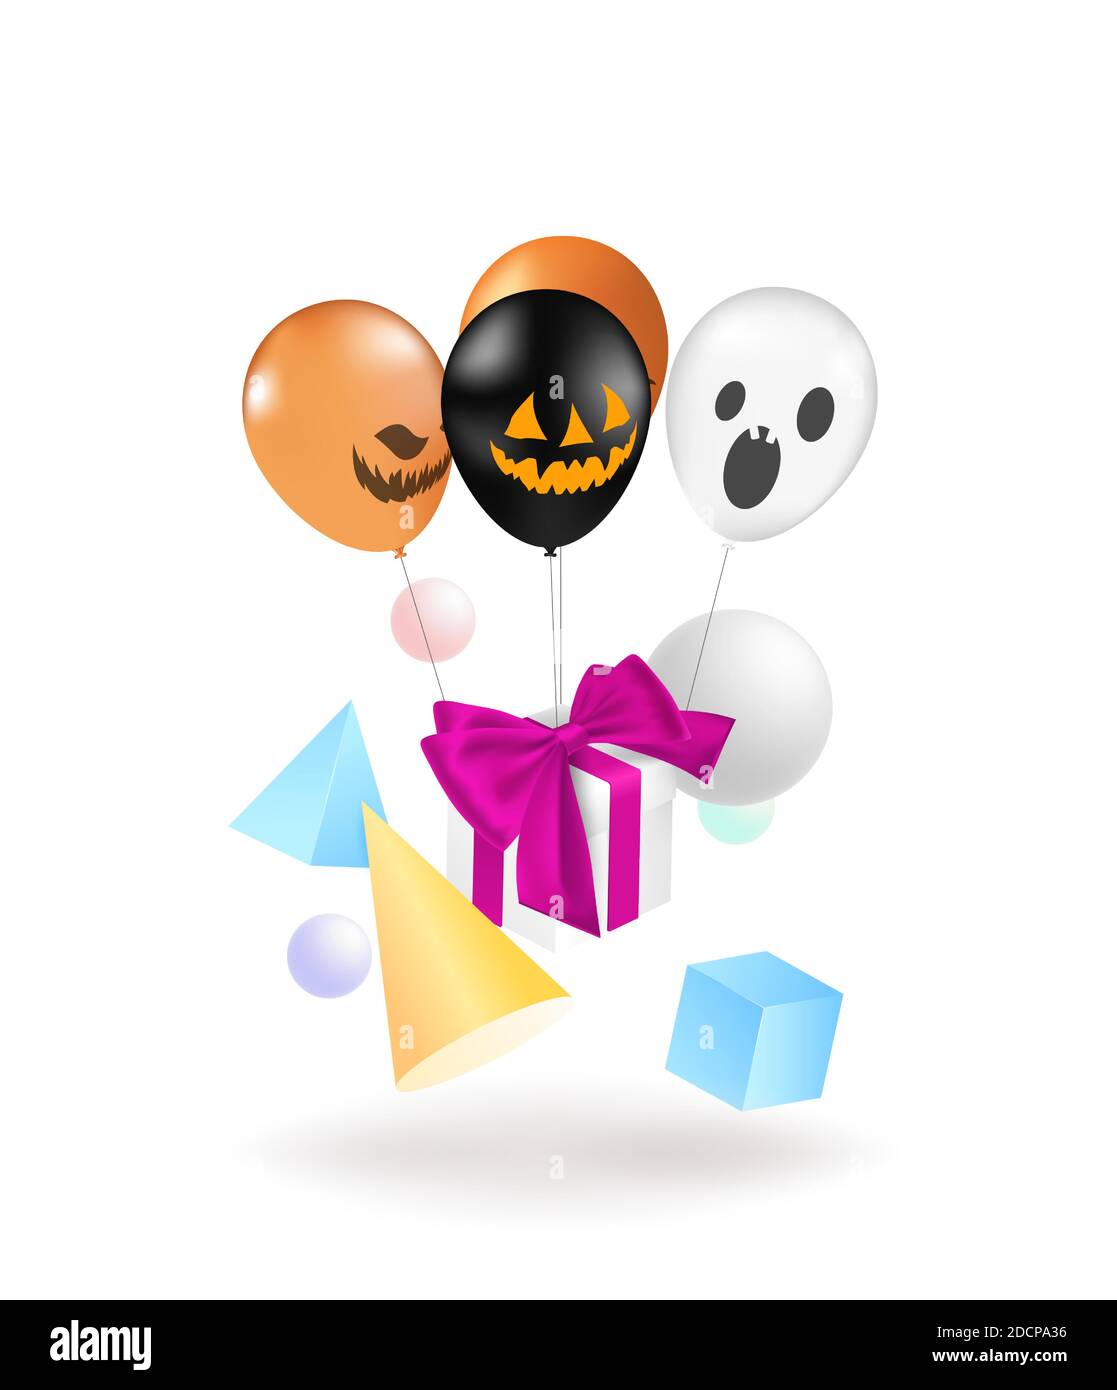 Halloween card with balloons helium and gifts. Vector illustration of Halloween balloon and gift box. Stock Vector